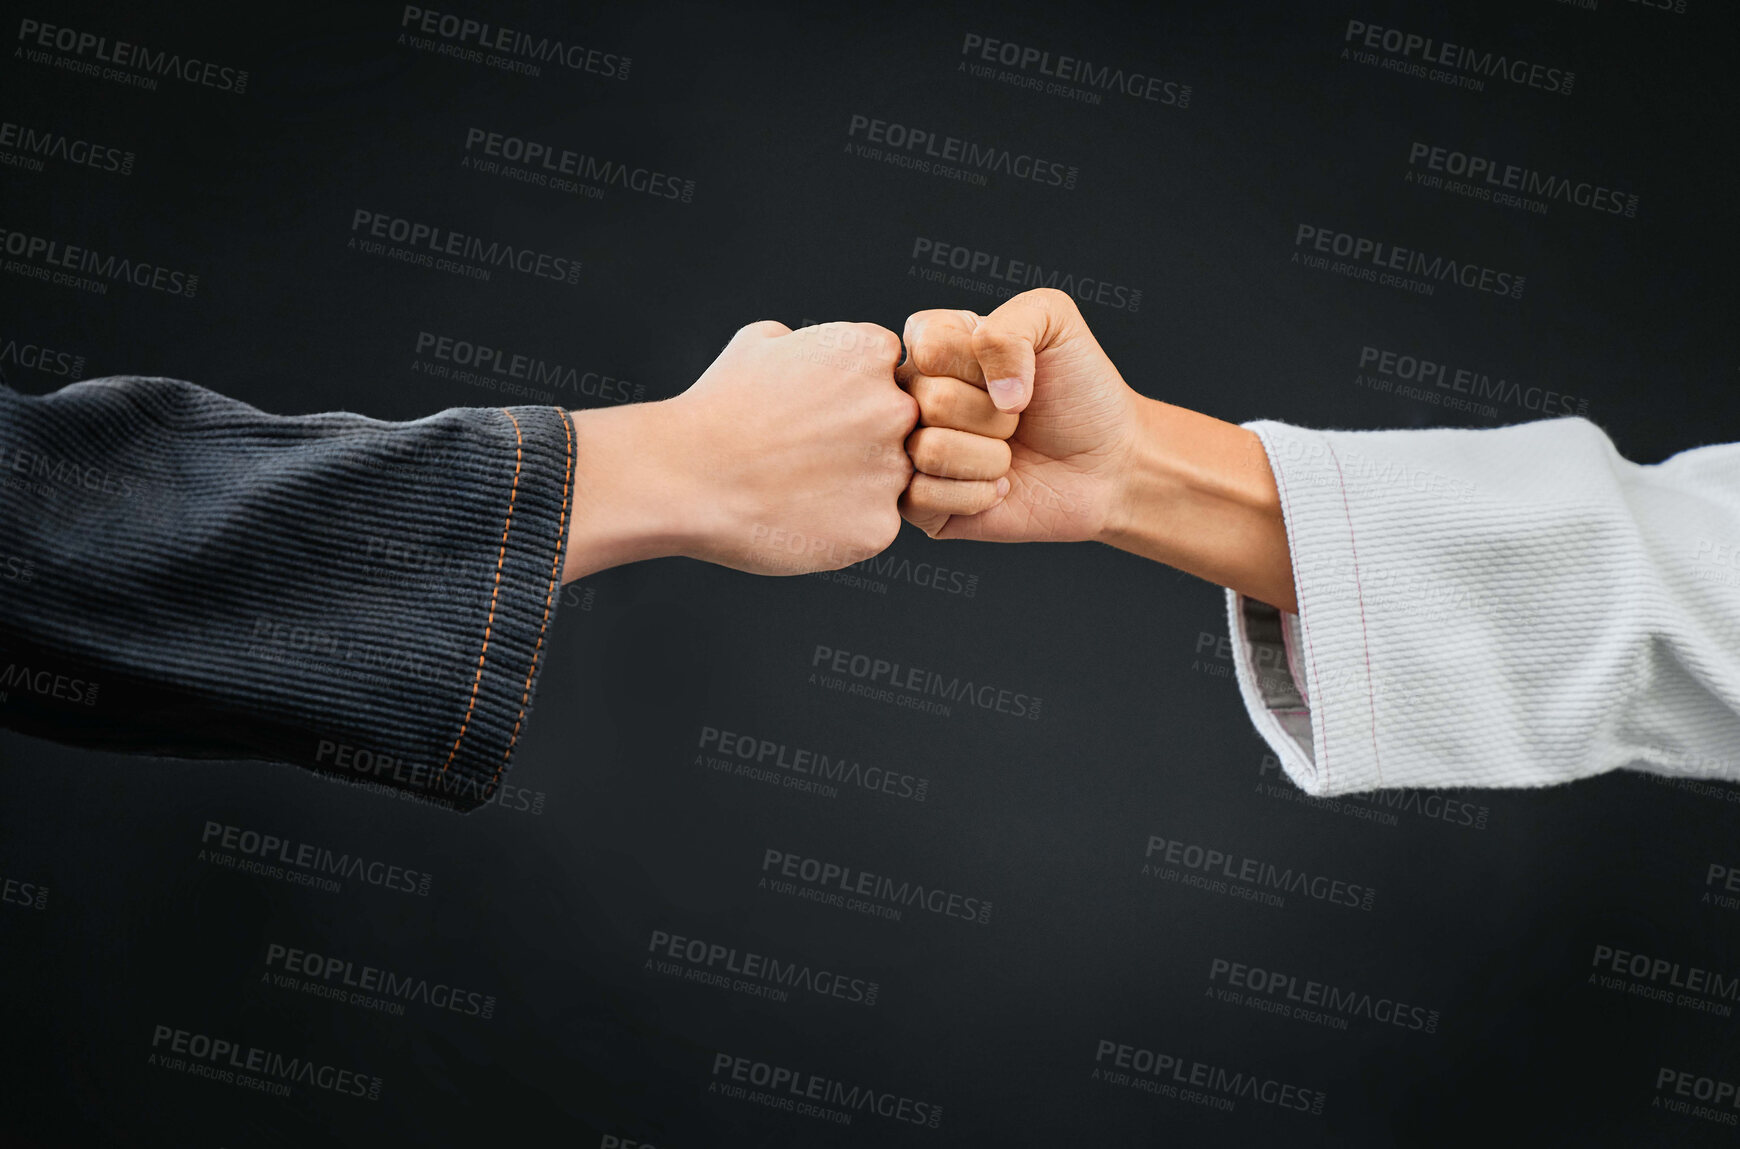 Buy stock photo Teamwork, respect and discipline with hands fist bumping before a fight, match or mma competition. Closeup of two athletes greeting before combat sport and self defense against a black background